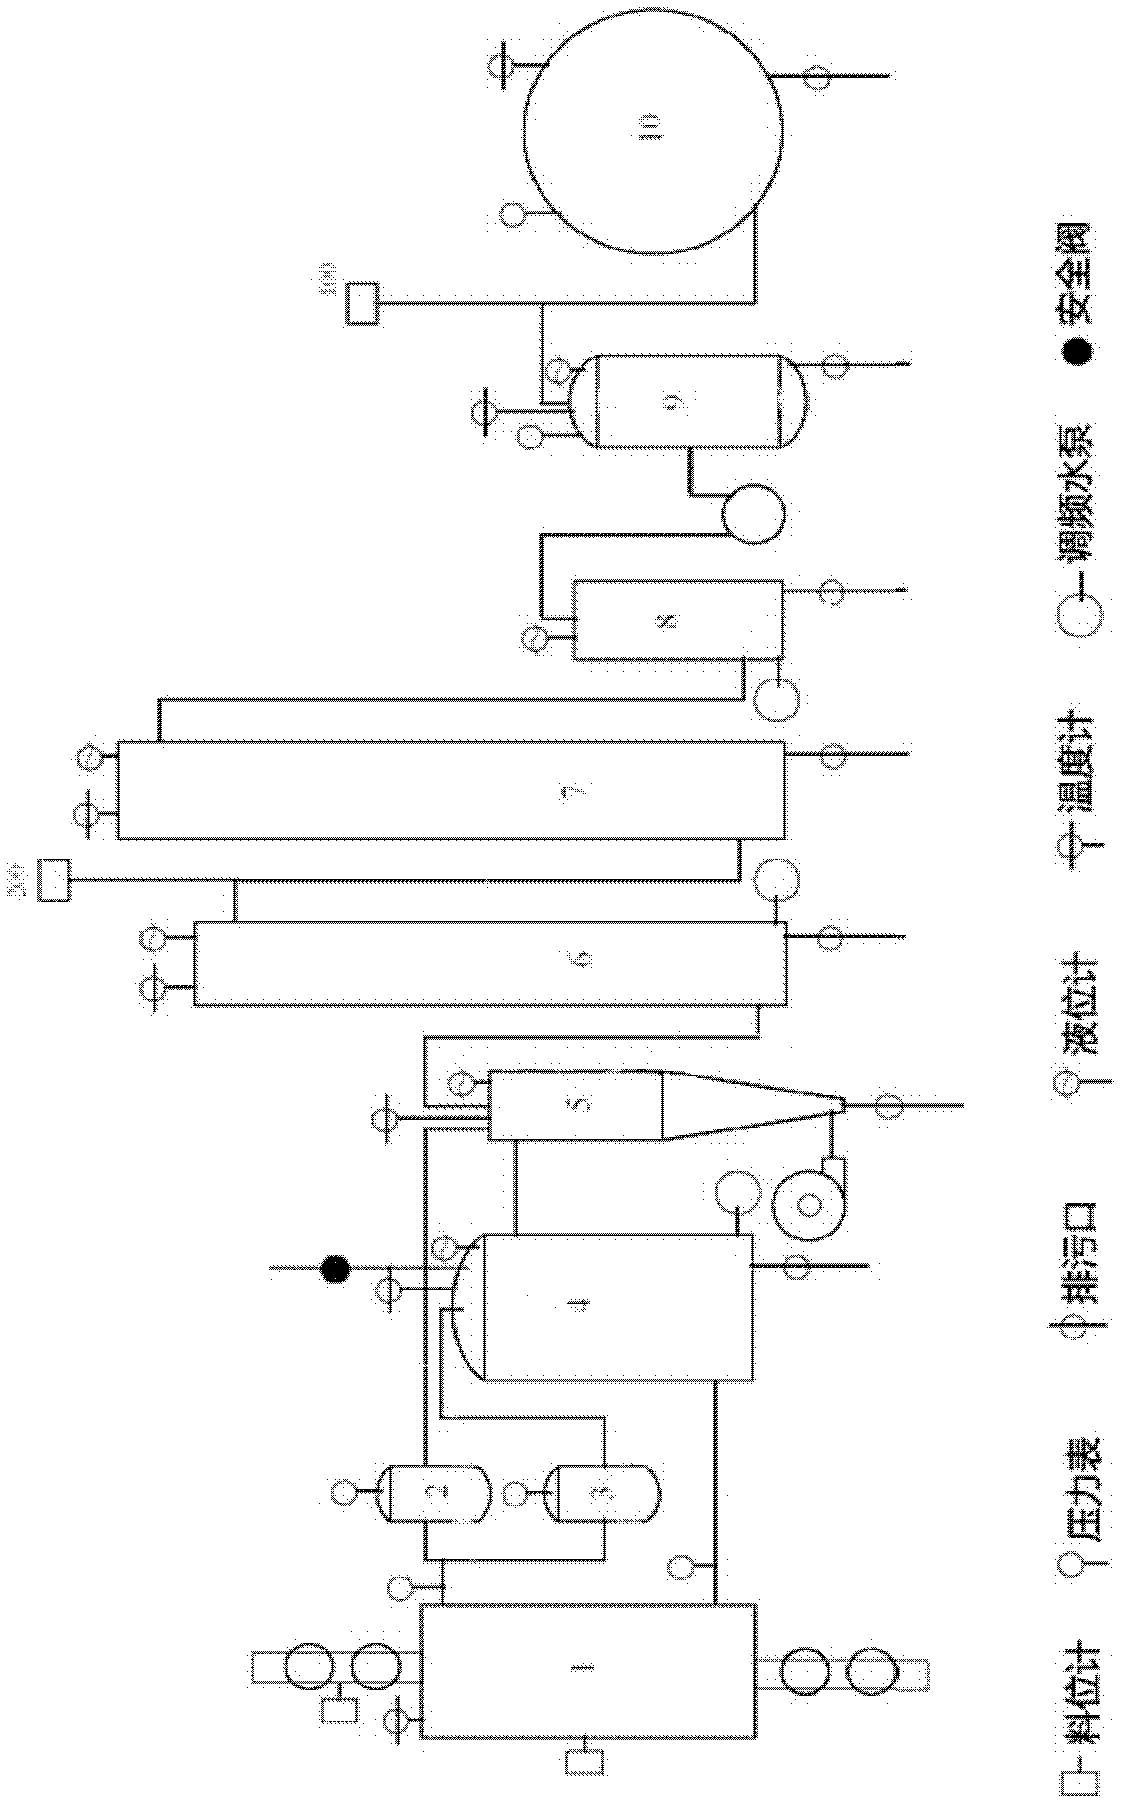 Biomass gasification device and process